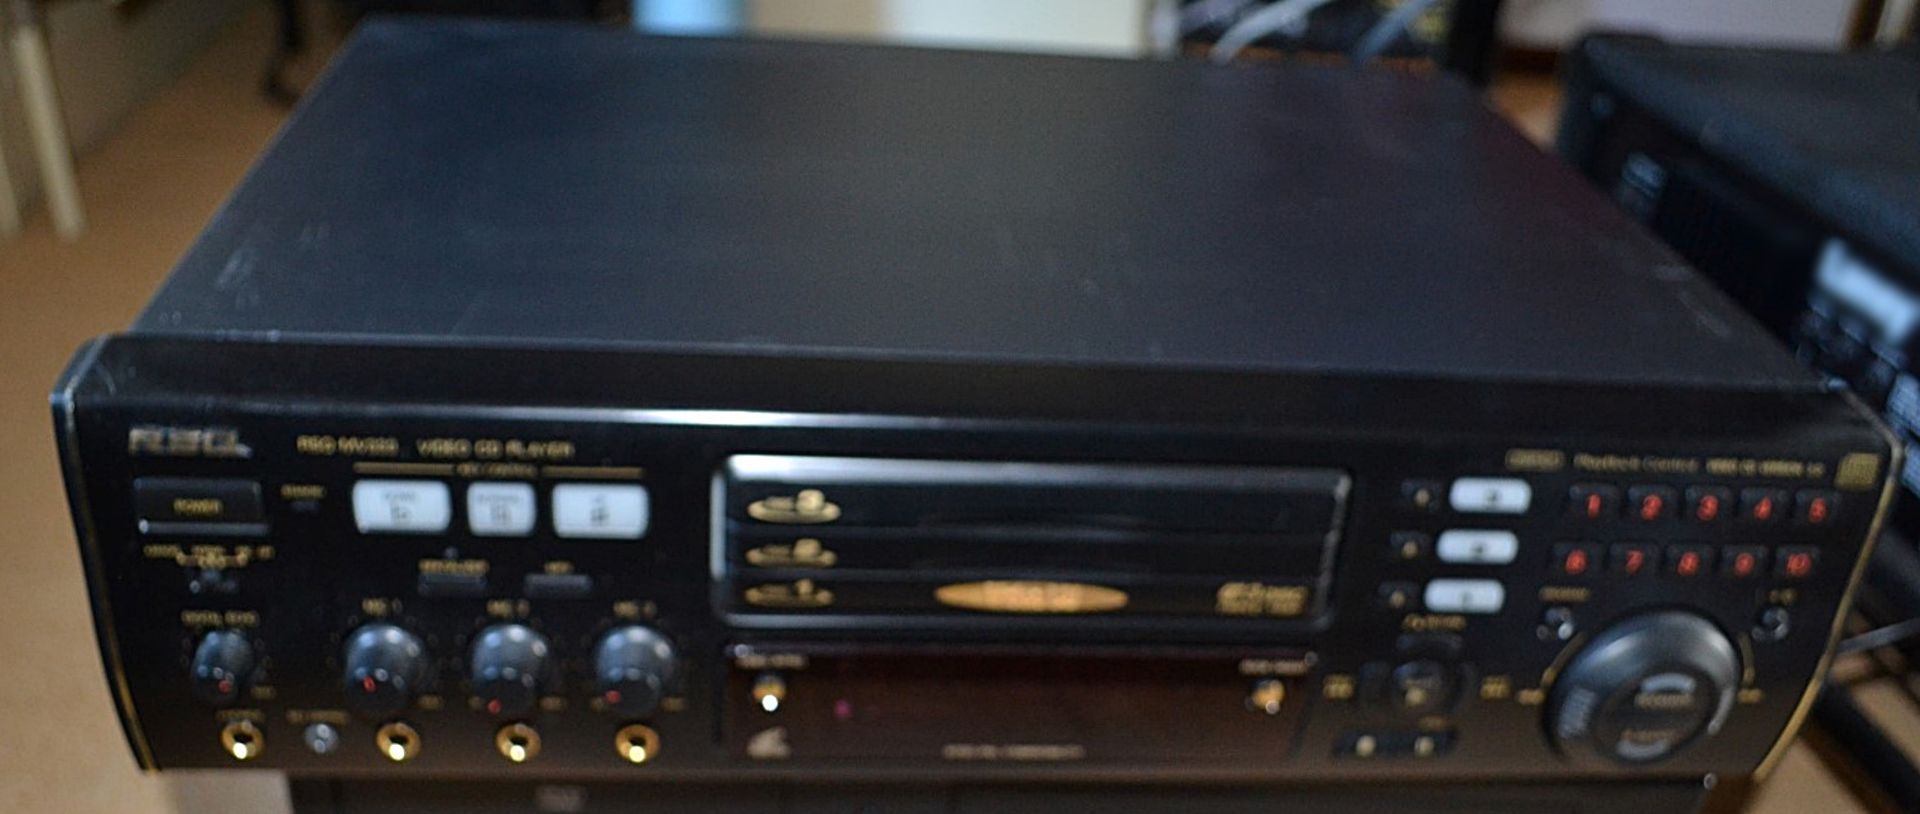 1 x RSQ MV-333 TRIPLE TRAY CD/CDG/VCD Karaoke Player - Preowned In Good Condition - Ref: KHF232 / - Image 2 of 2